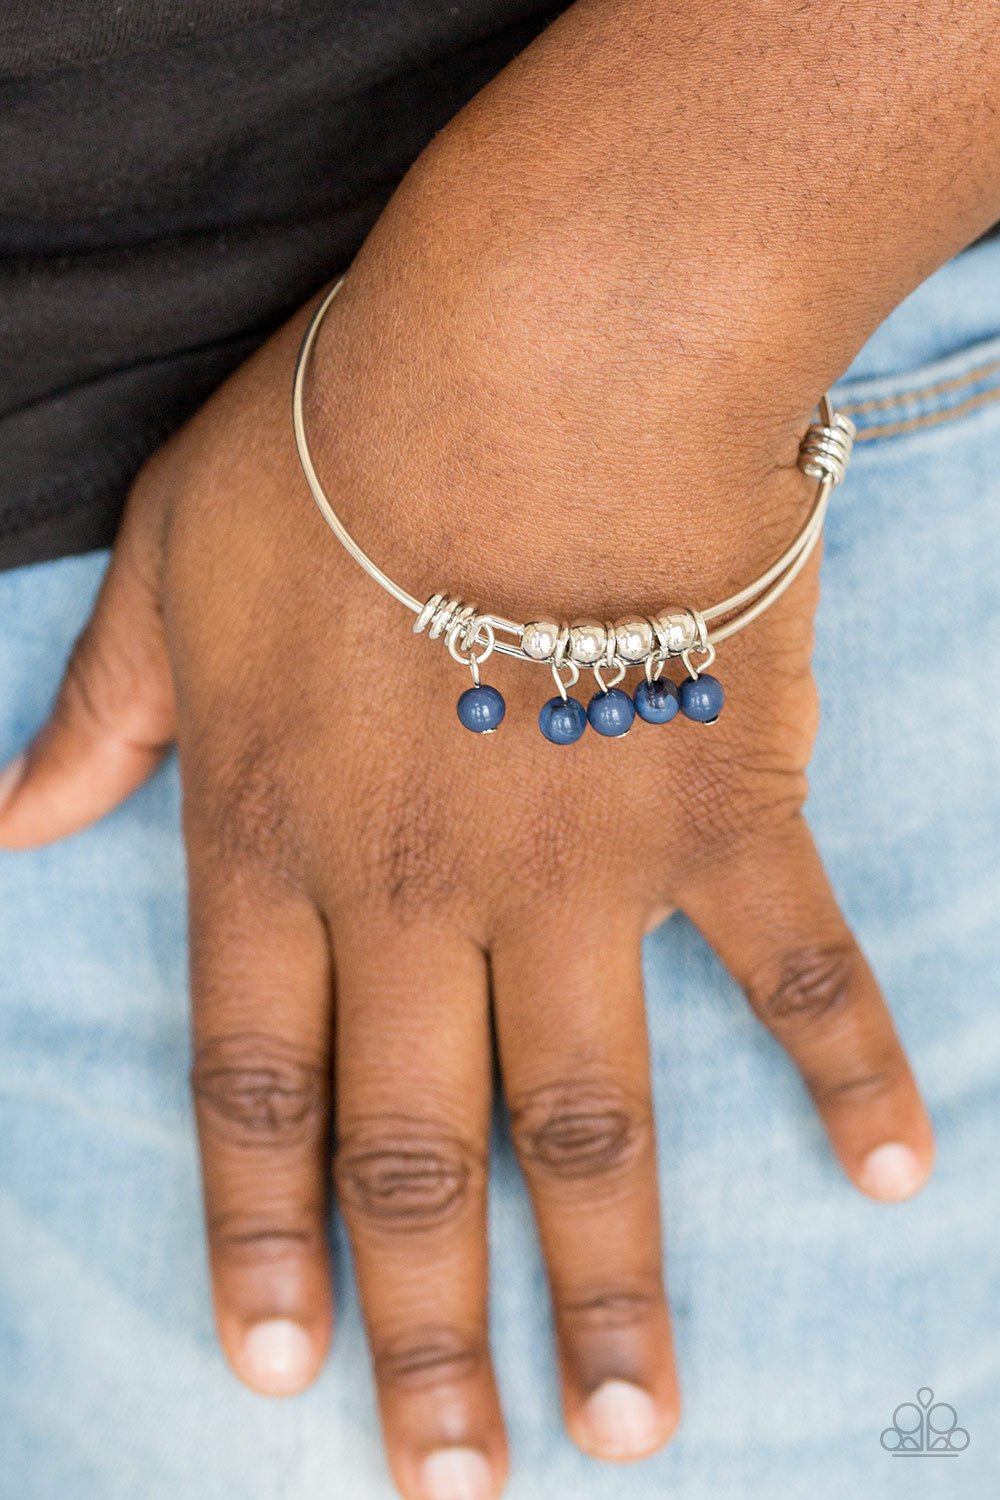 &lt;p&gt;Silver wire coils around the wrist, creating an adjustable-like bangle. Glassy blue beads slide between two wire wrap fittings, creating colorful accents along the wrist.&lt;/p&gt;
&lt;p&gt;&lt;i&gt;Sold as one individual bracelet.&lt;/i&gt;&lt;/p&gt;